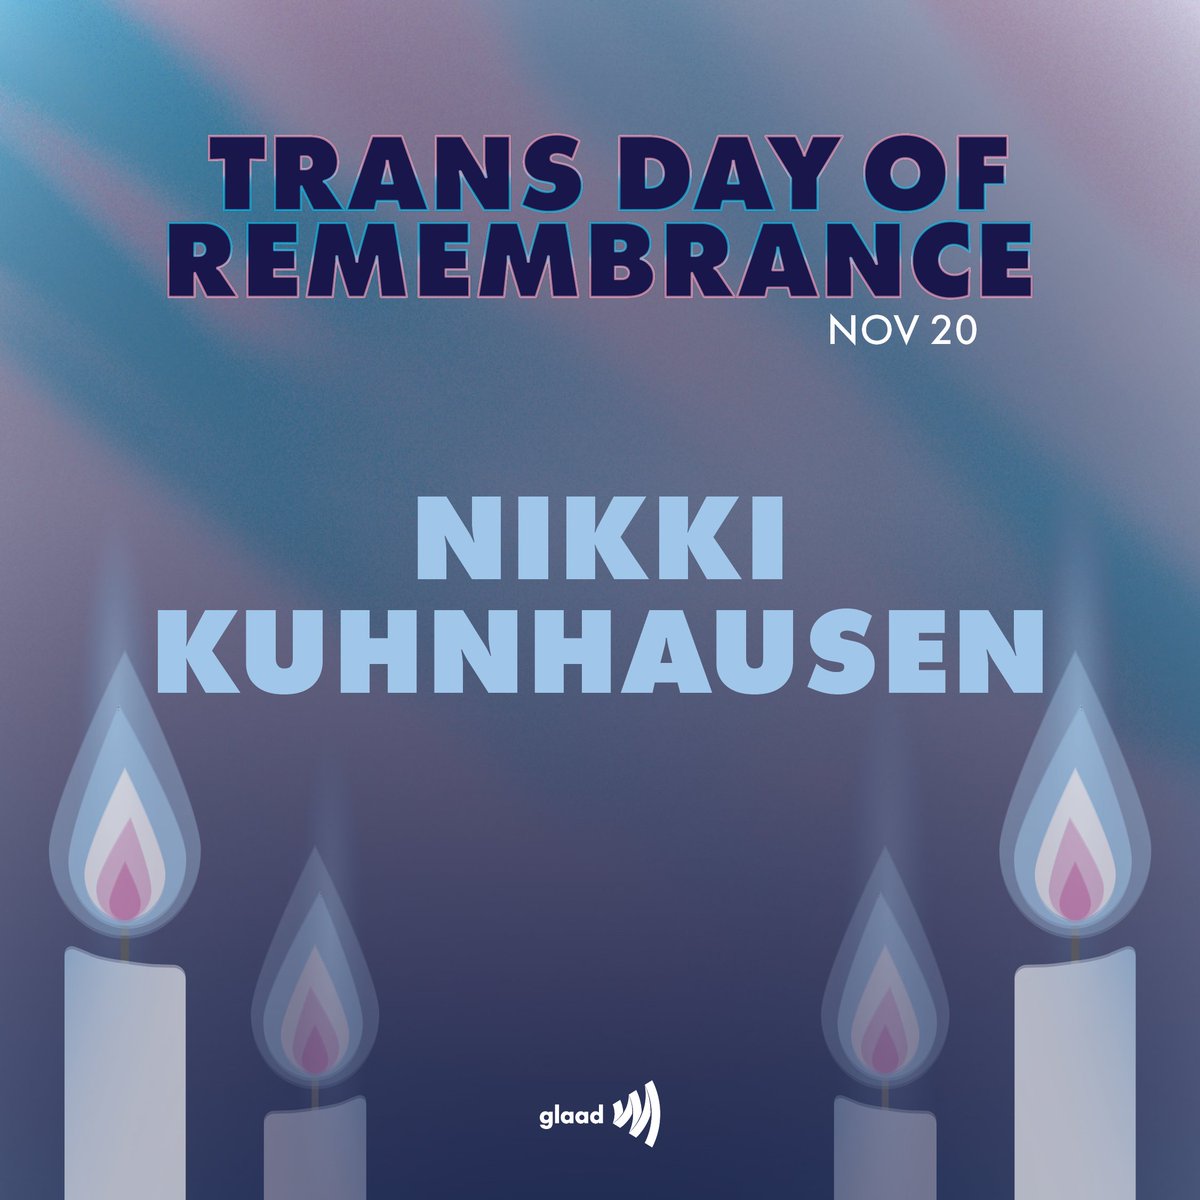 Nikki Kuhnhausen, a transgender teen, was killed in Vancouver, Washington some time after her disappearance in June 2019. She was 17 years old.